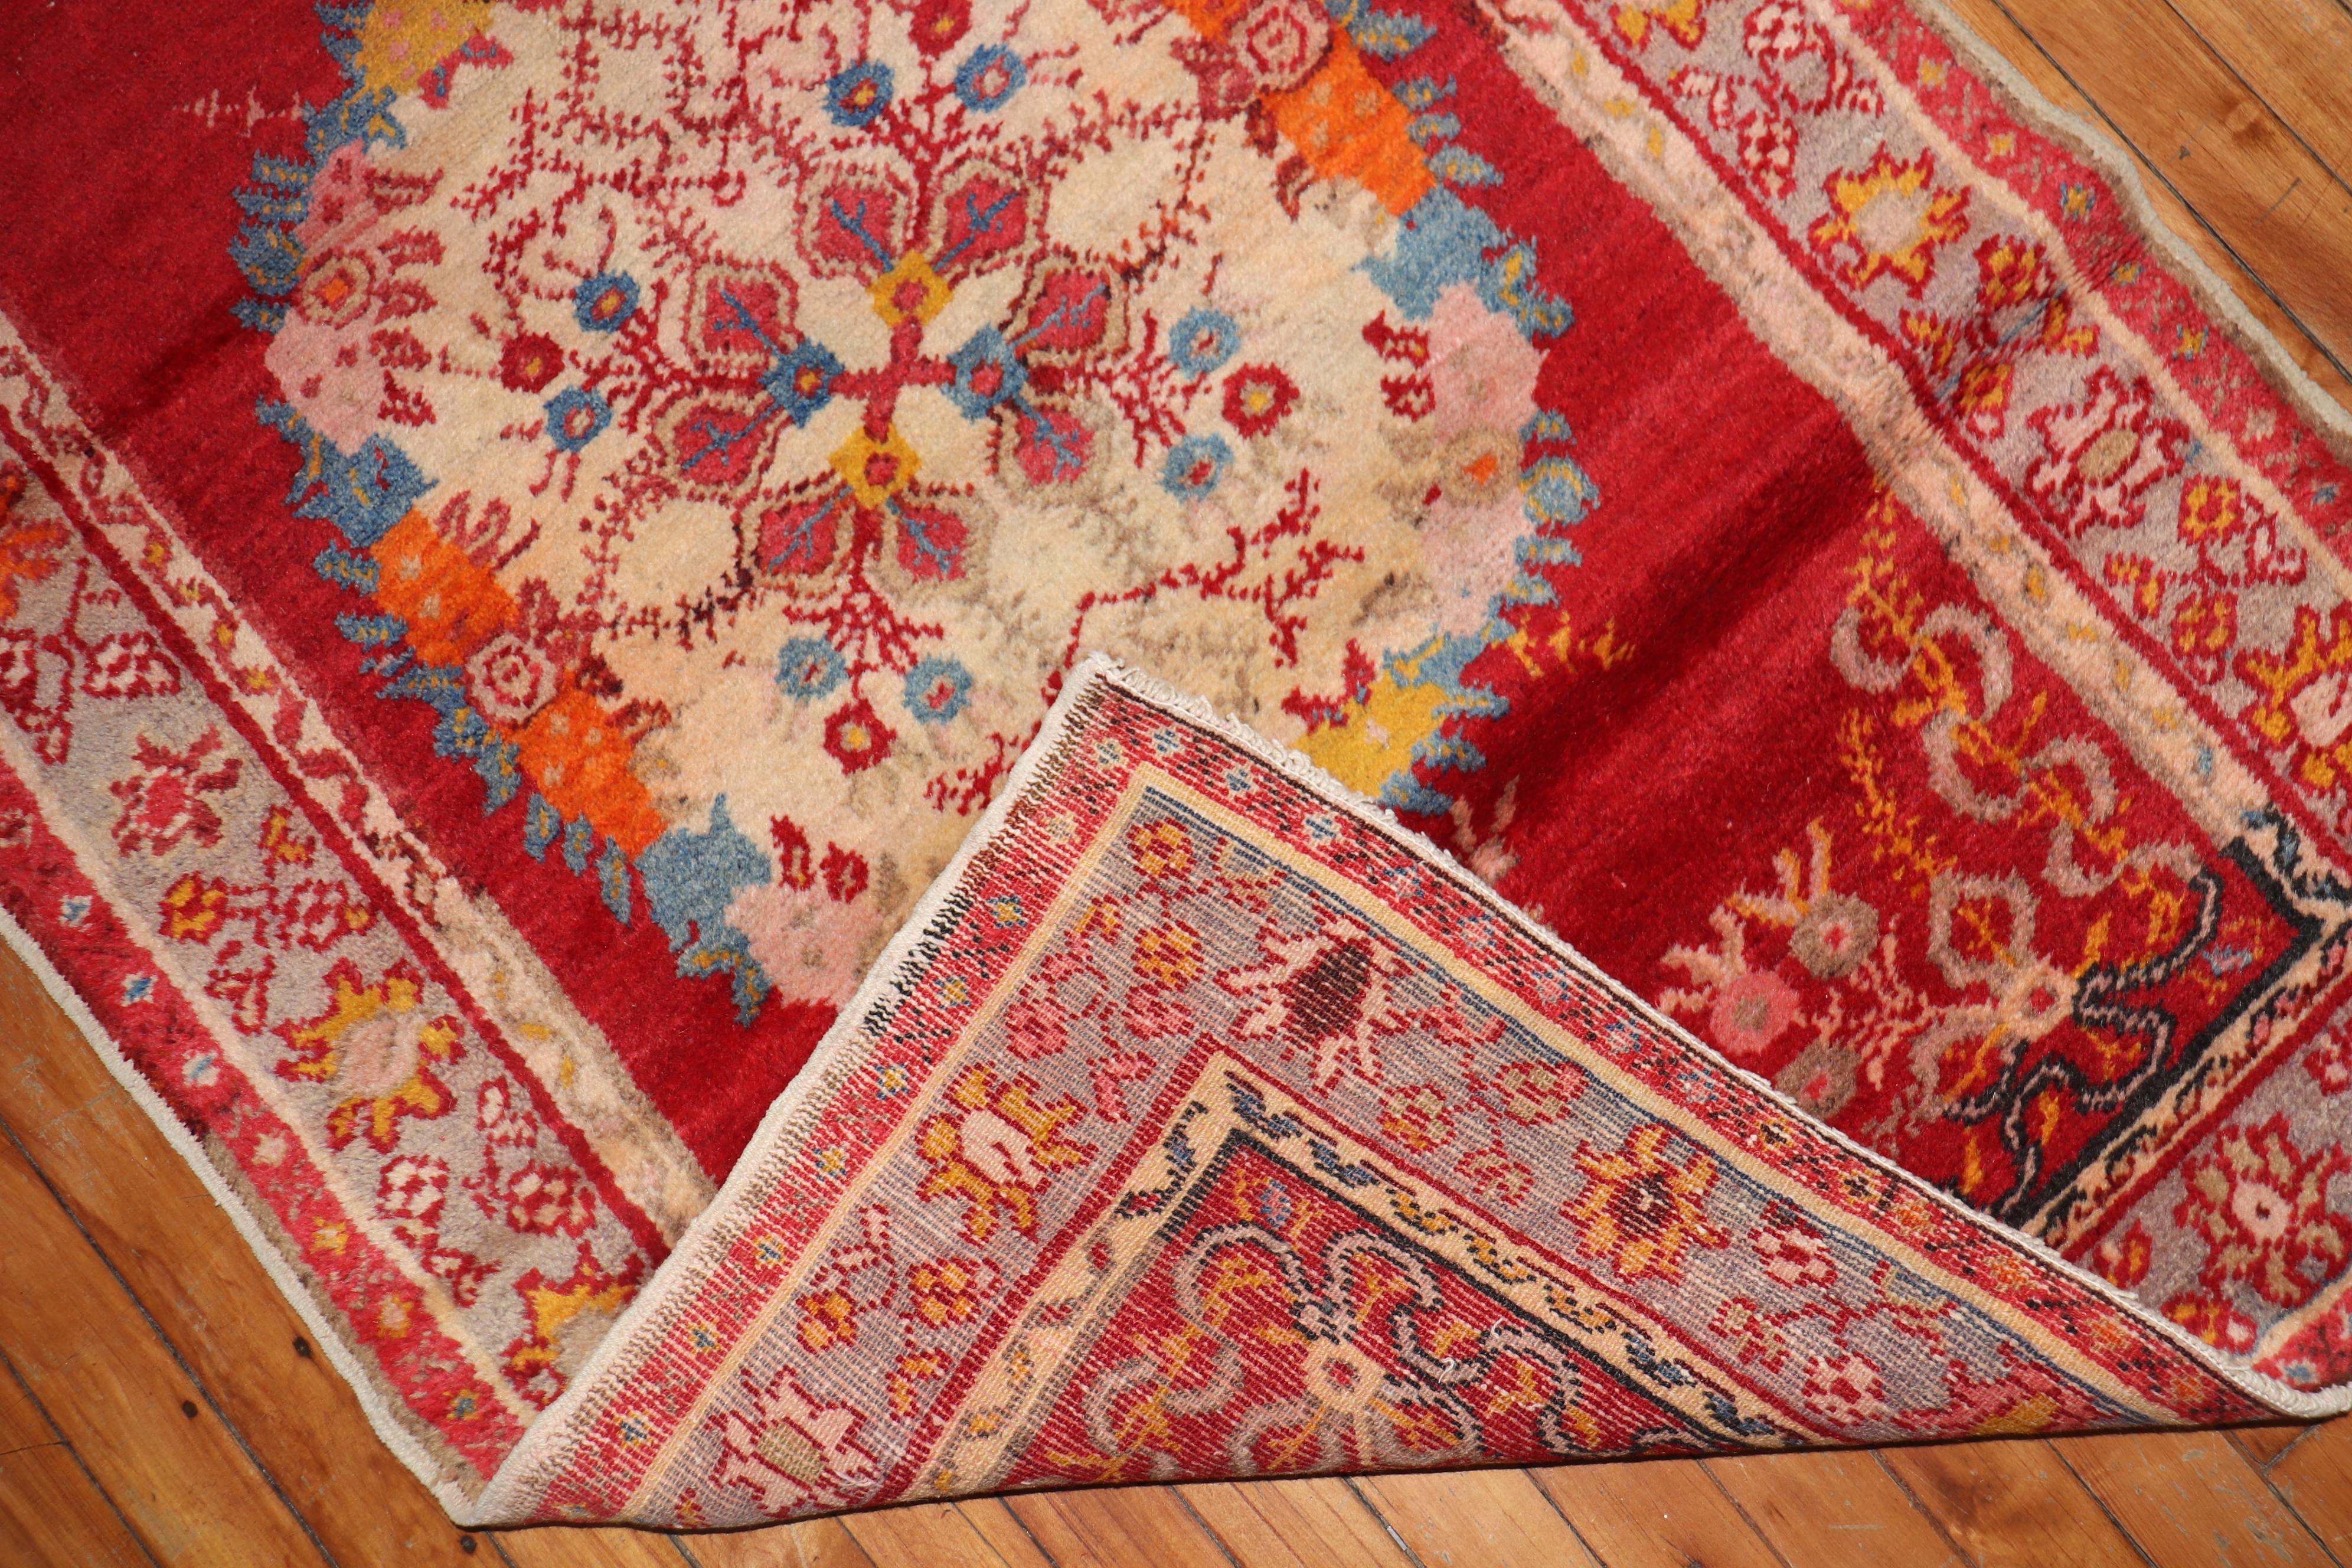 Vintage Turkish Oushak runner with three medallions on a bright red field.

Measures: 3' x 10'9''.